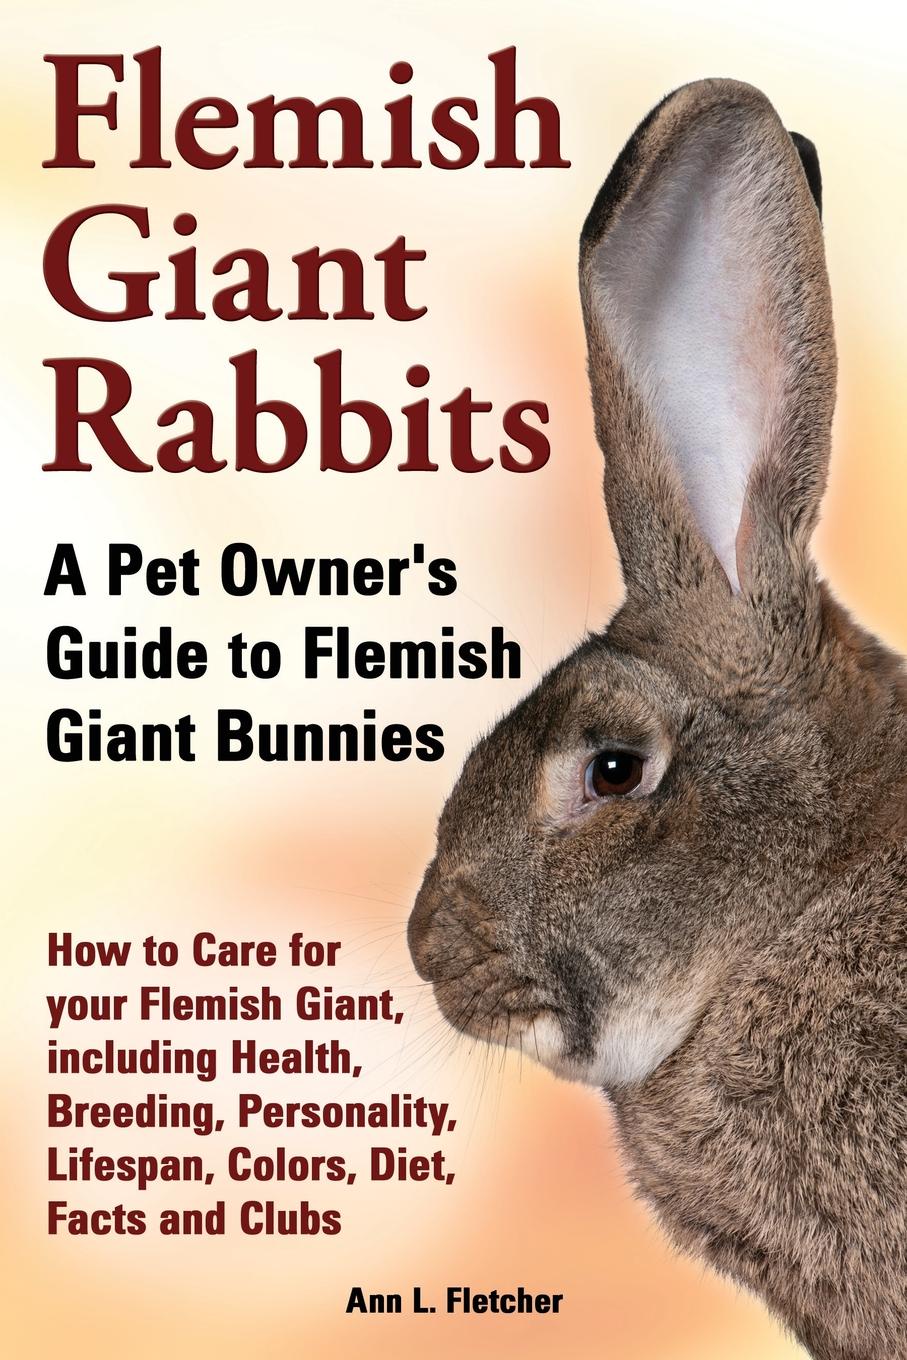 Flemish Giant Rabbits, A Pet Owner`s Guide to Flemish Giant Bunnies How to Care for your Flemish Giant, including Health, Breeding, Personality, Lifespan, Colors, Diet, Facts and Clubs